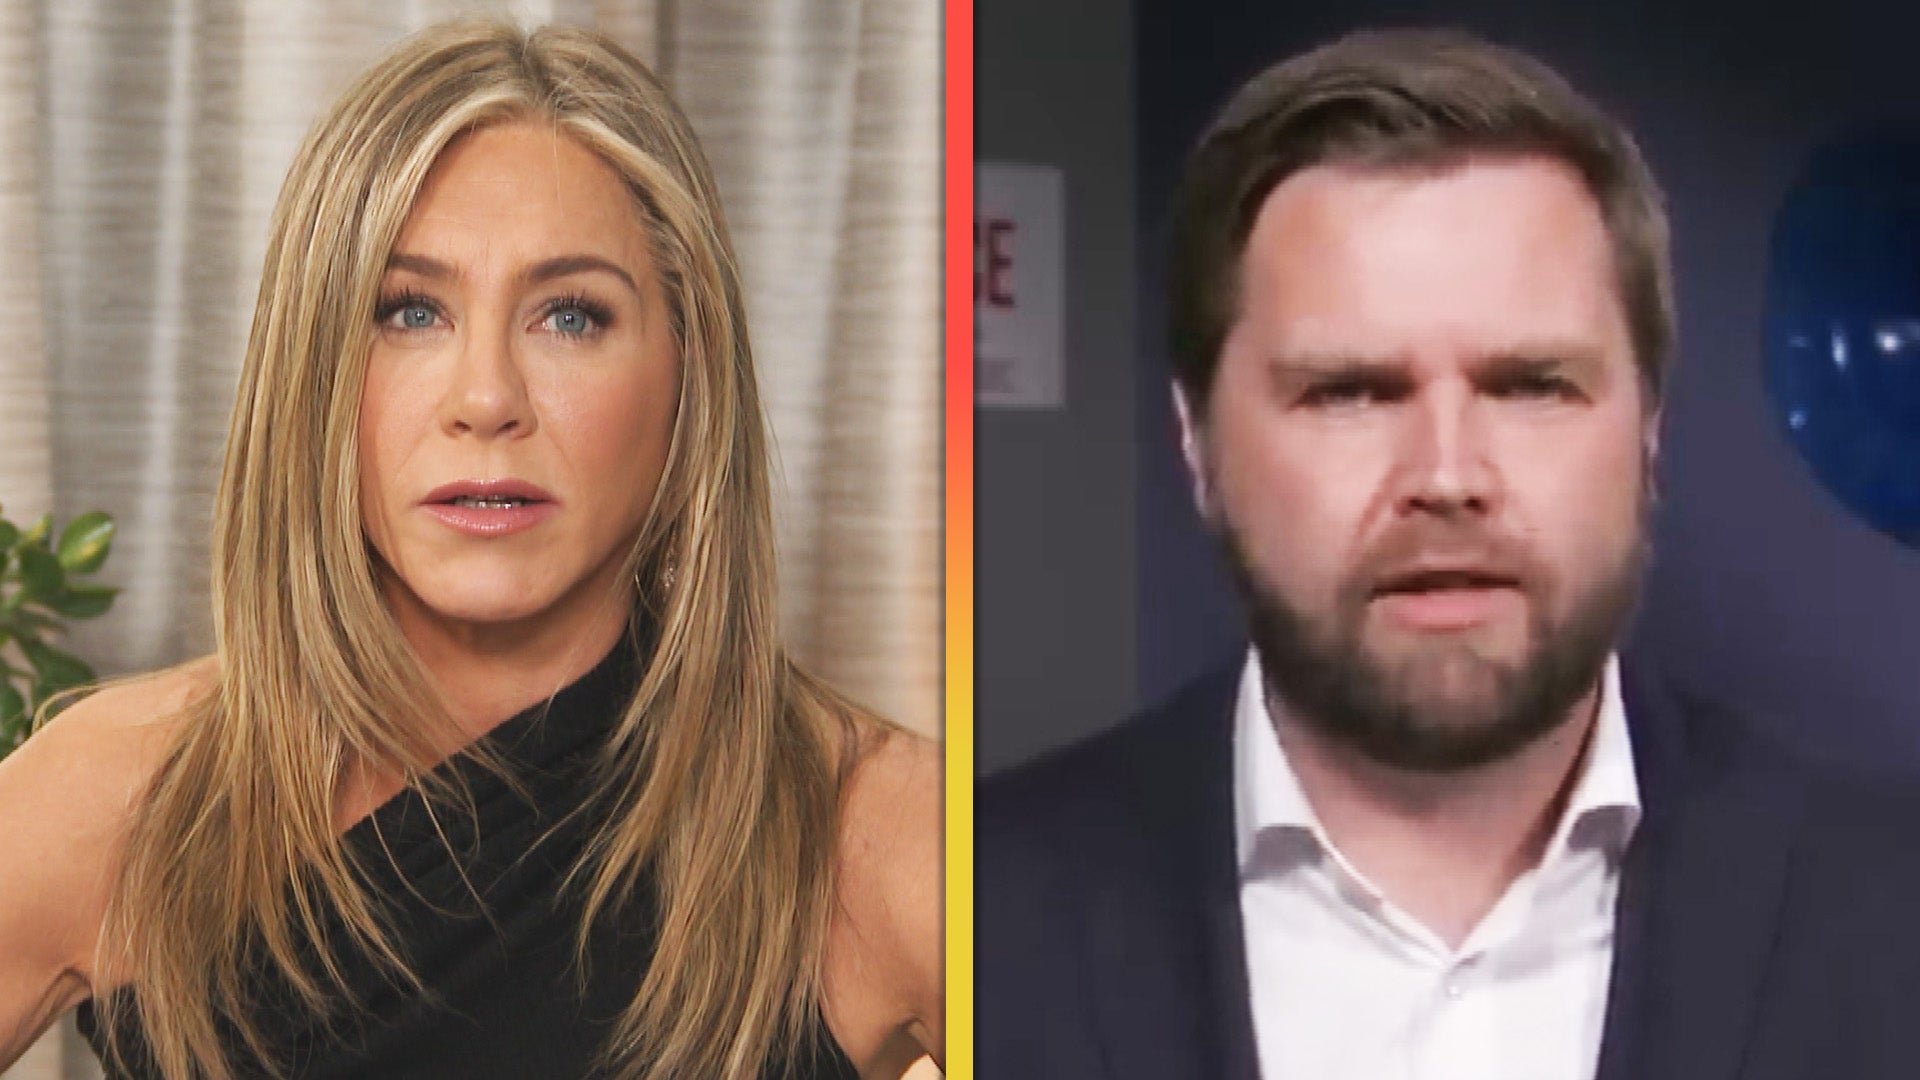 Jennifer Aniston Calls Out J.D. Vance for Resurfaced 'Childless' Women Comments